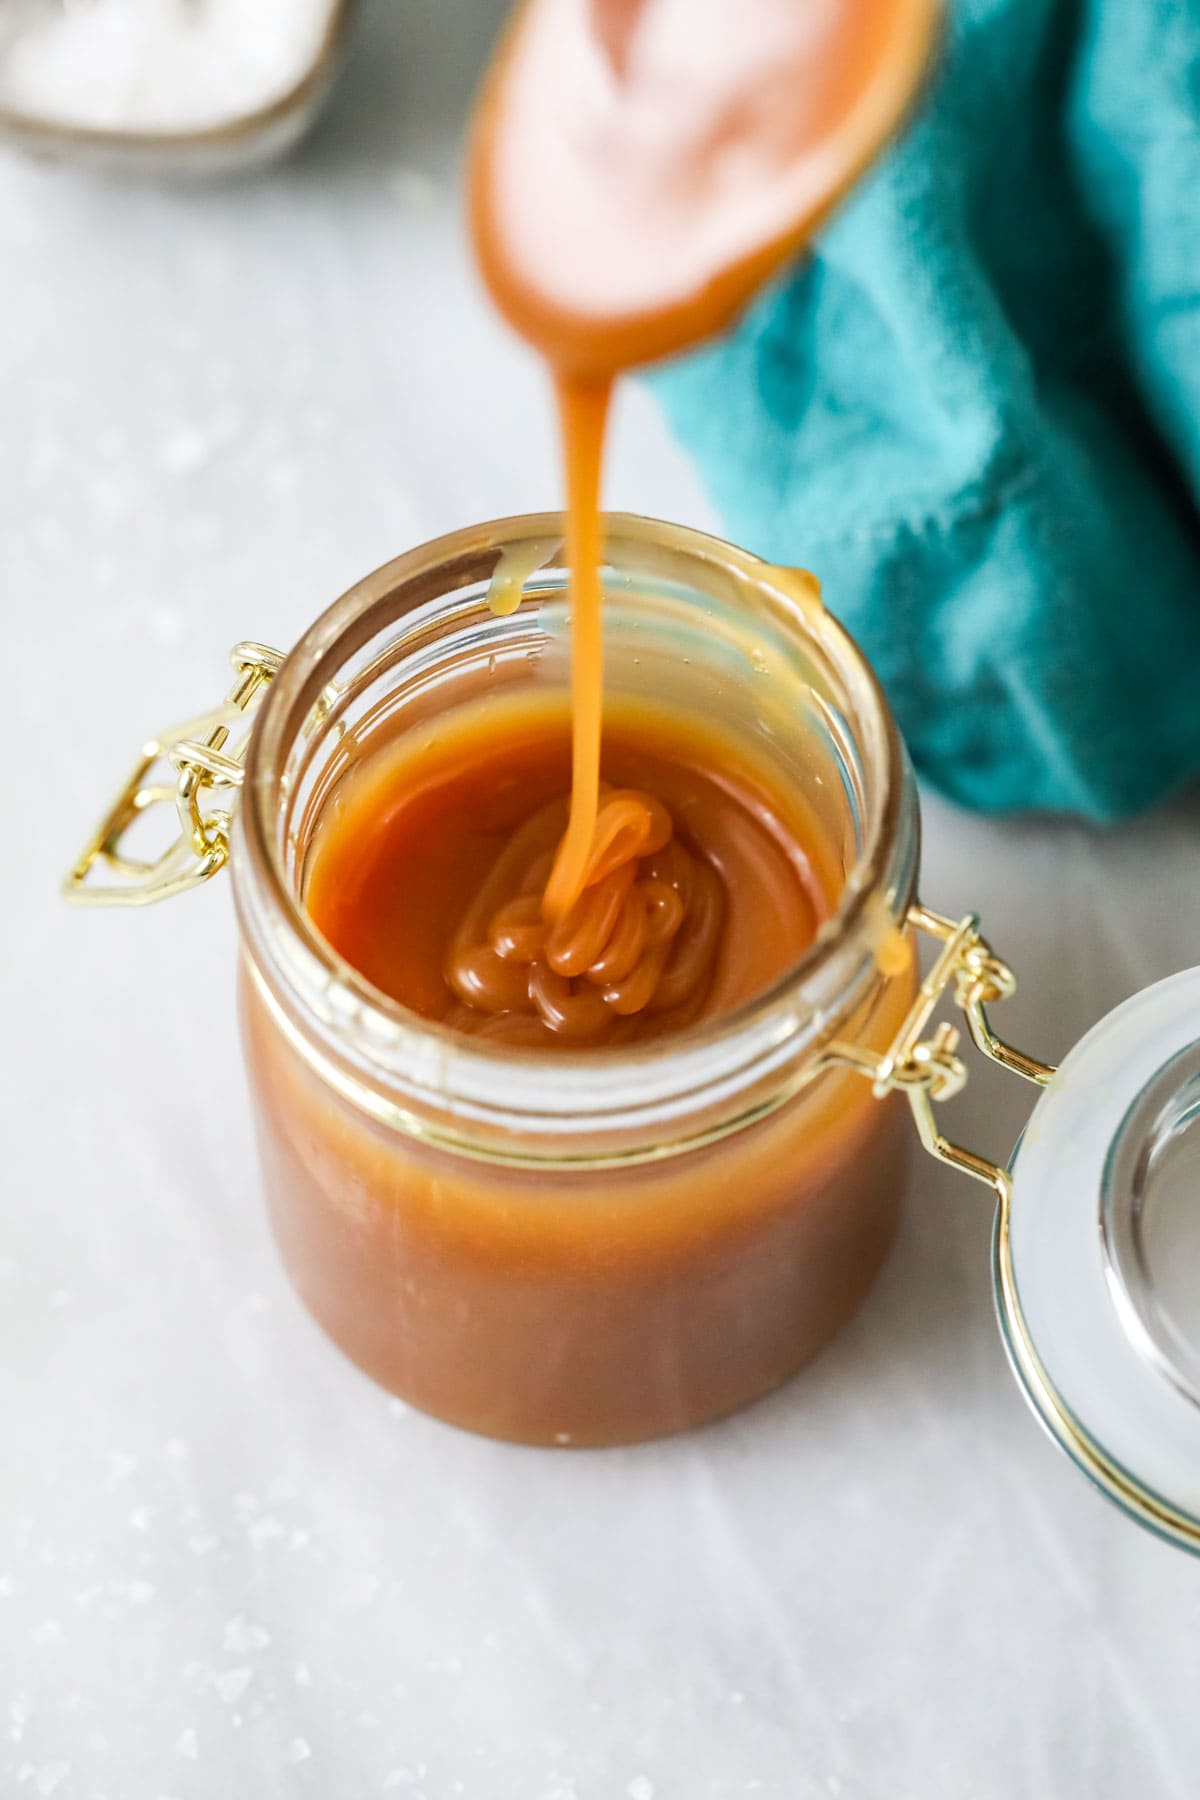 Overhead view of caramel dripping off a spoon into a jar.